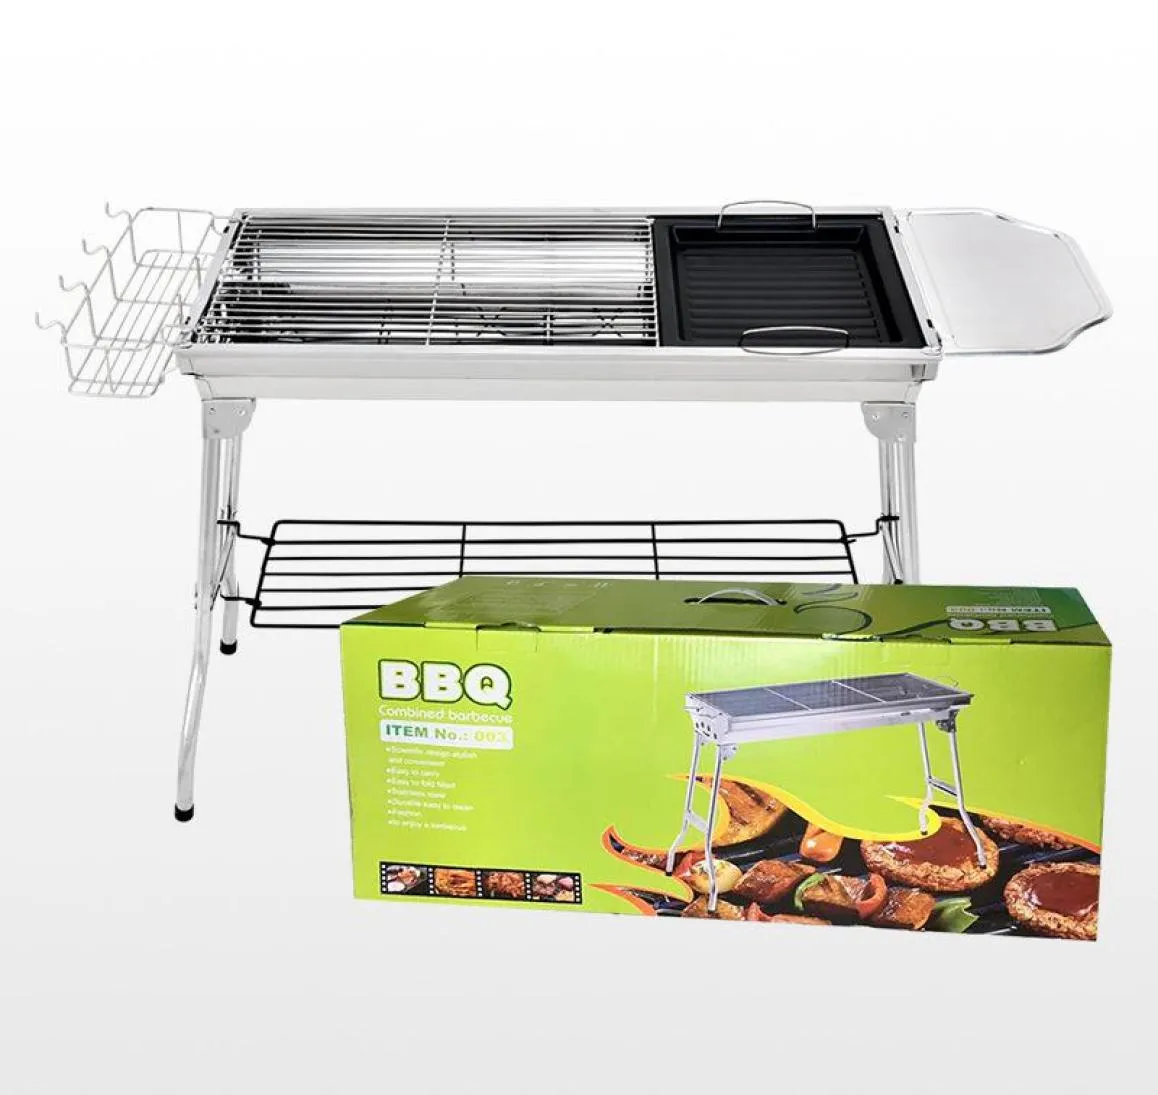 High Quality BBQ Charcoal Grill Portable Foldable Stainless Steel Barbecue Stove Shelf for Outdoor Garden Family Party3934829